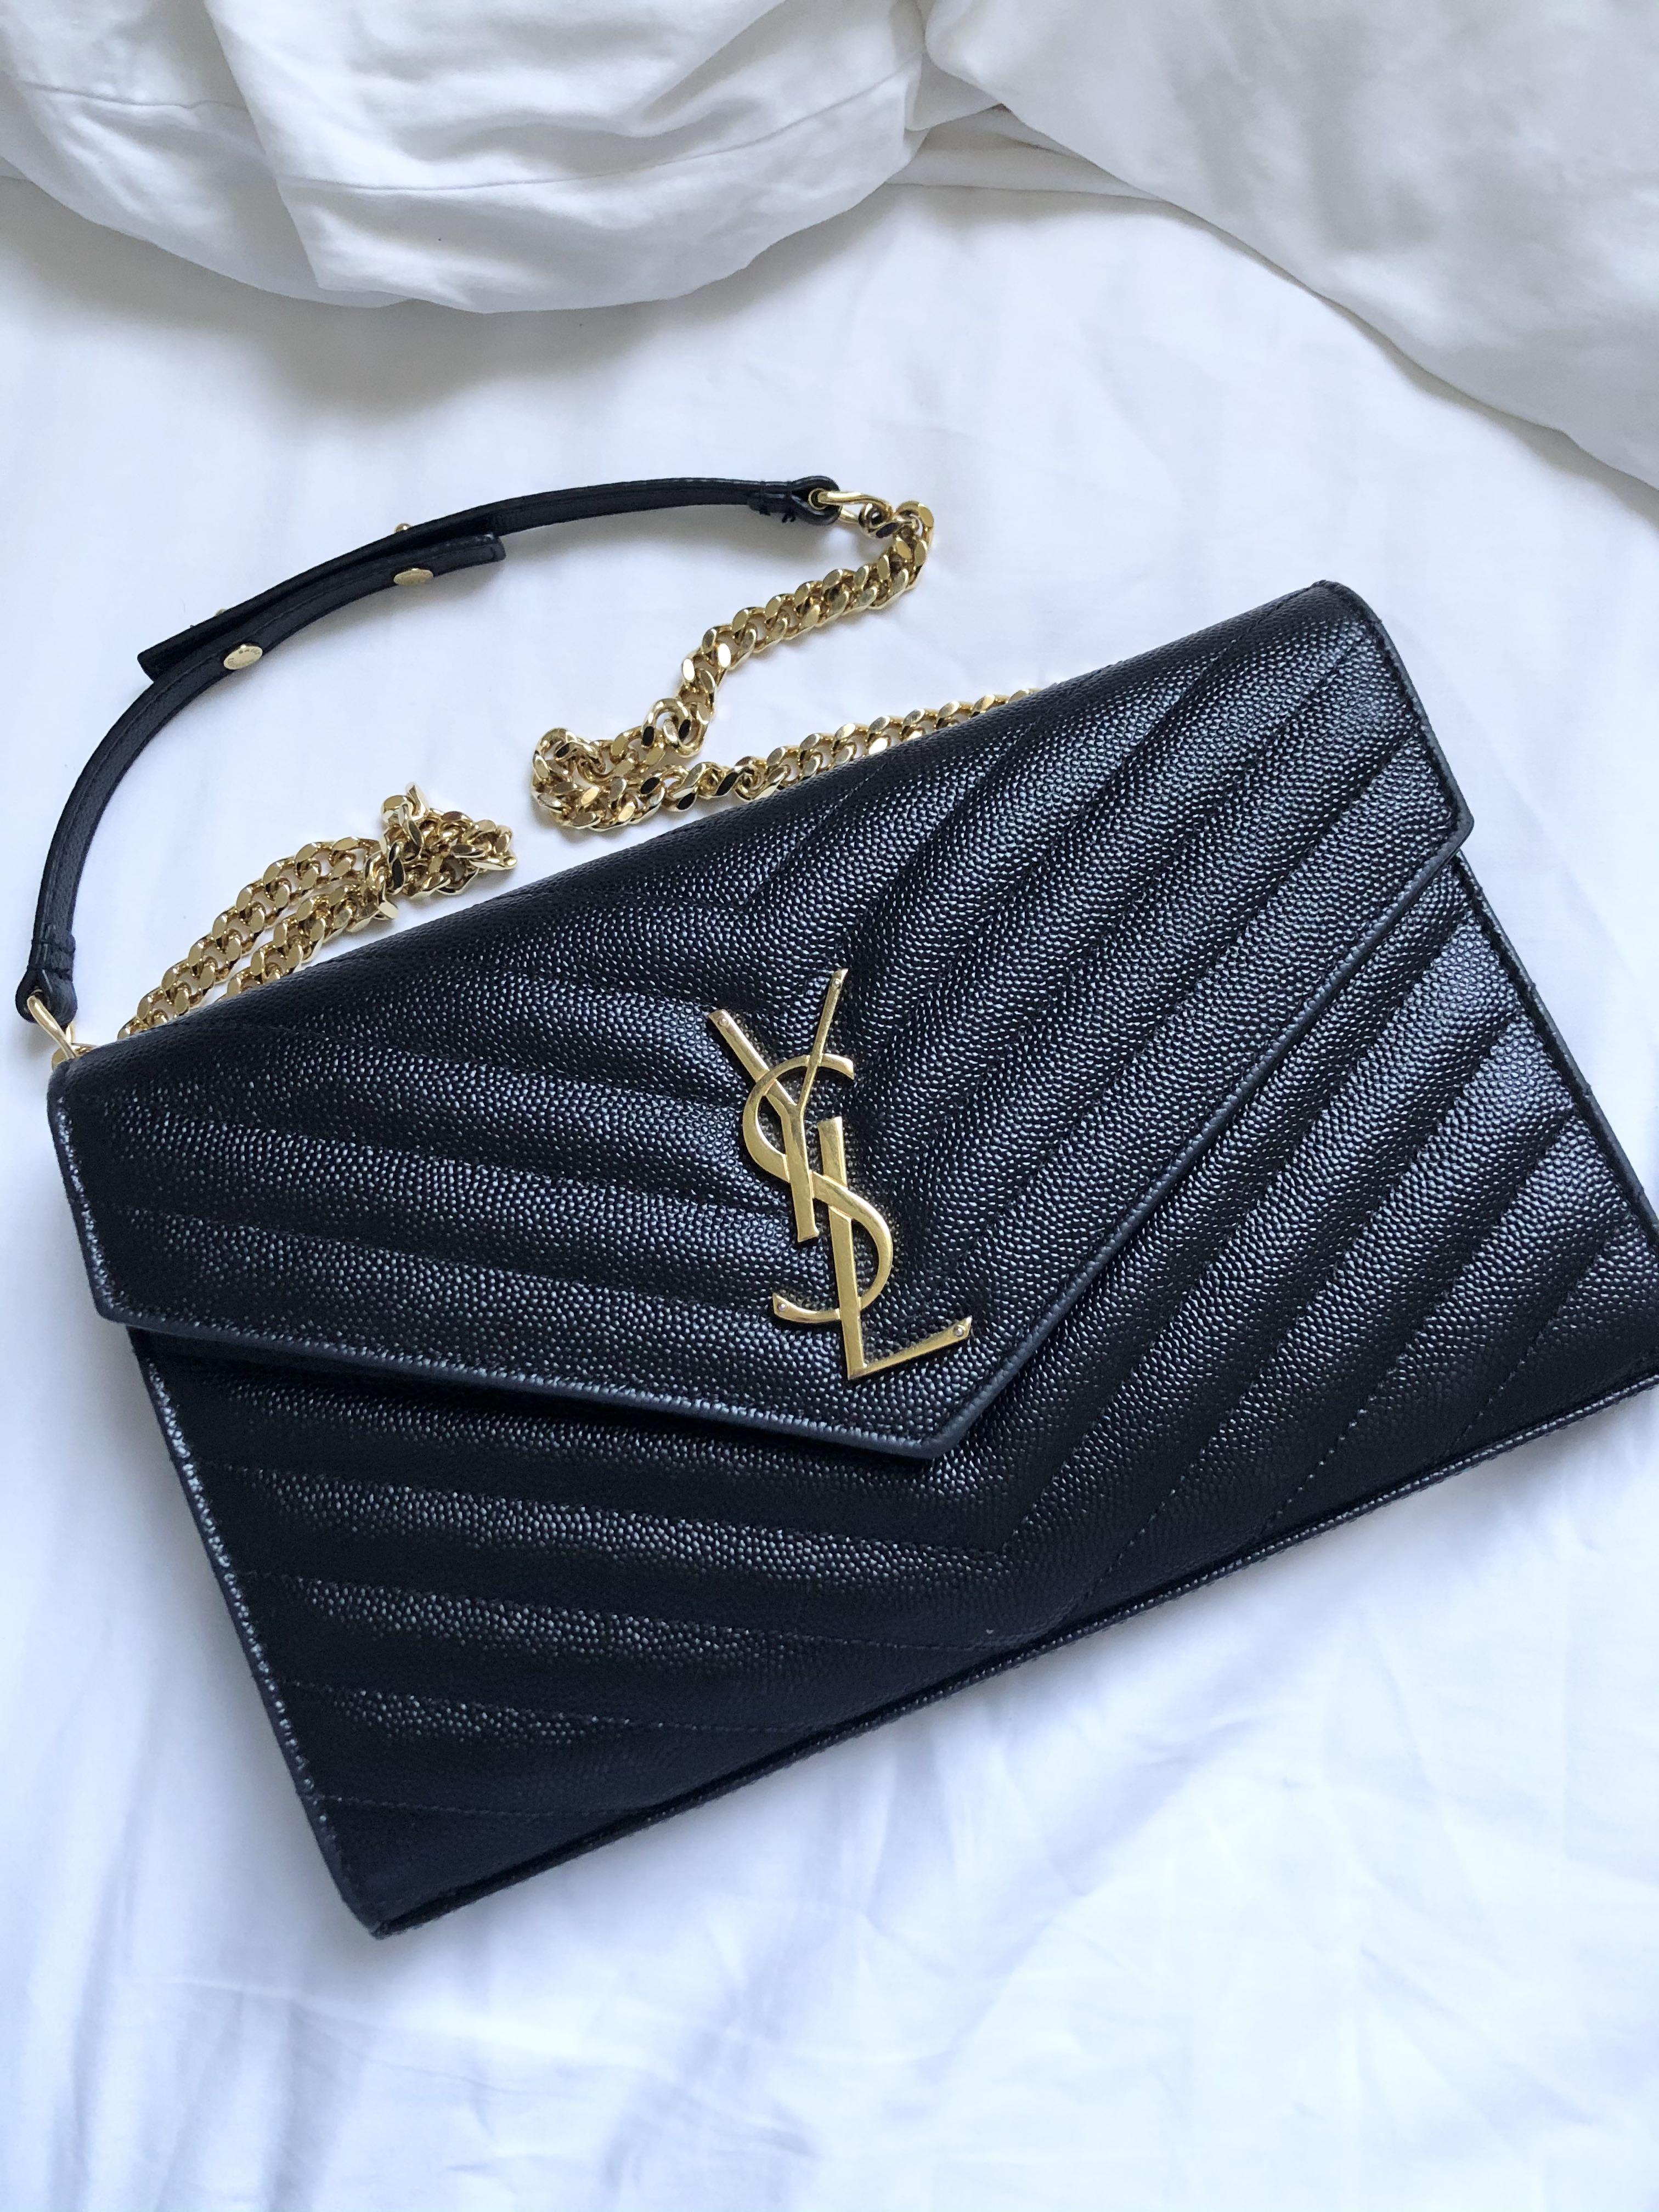 How Can You Tell an Authentic YSL Bag from a Fake  HG Bags Online